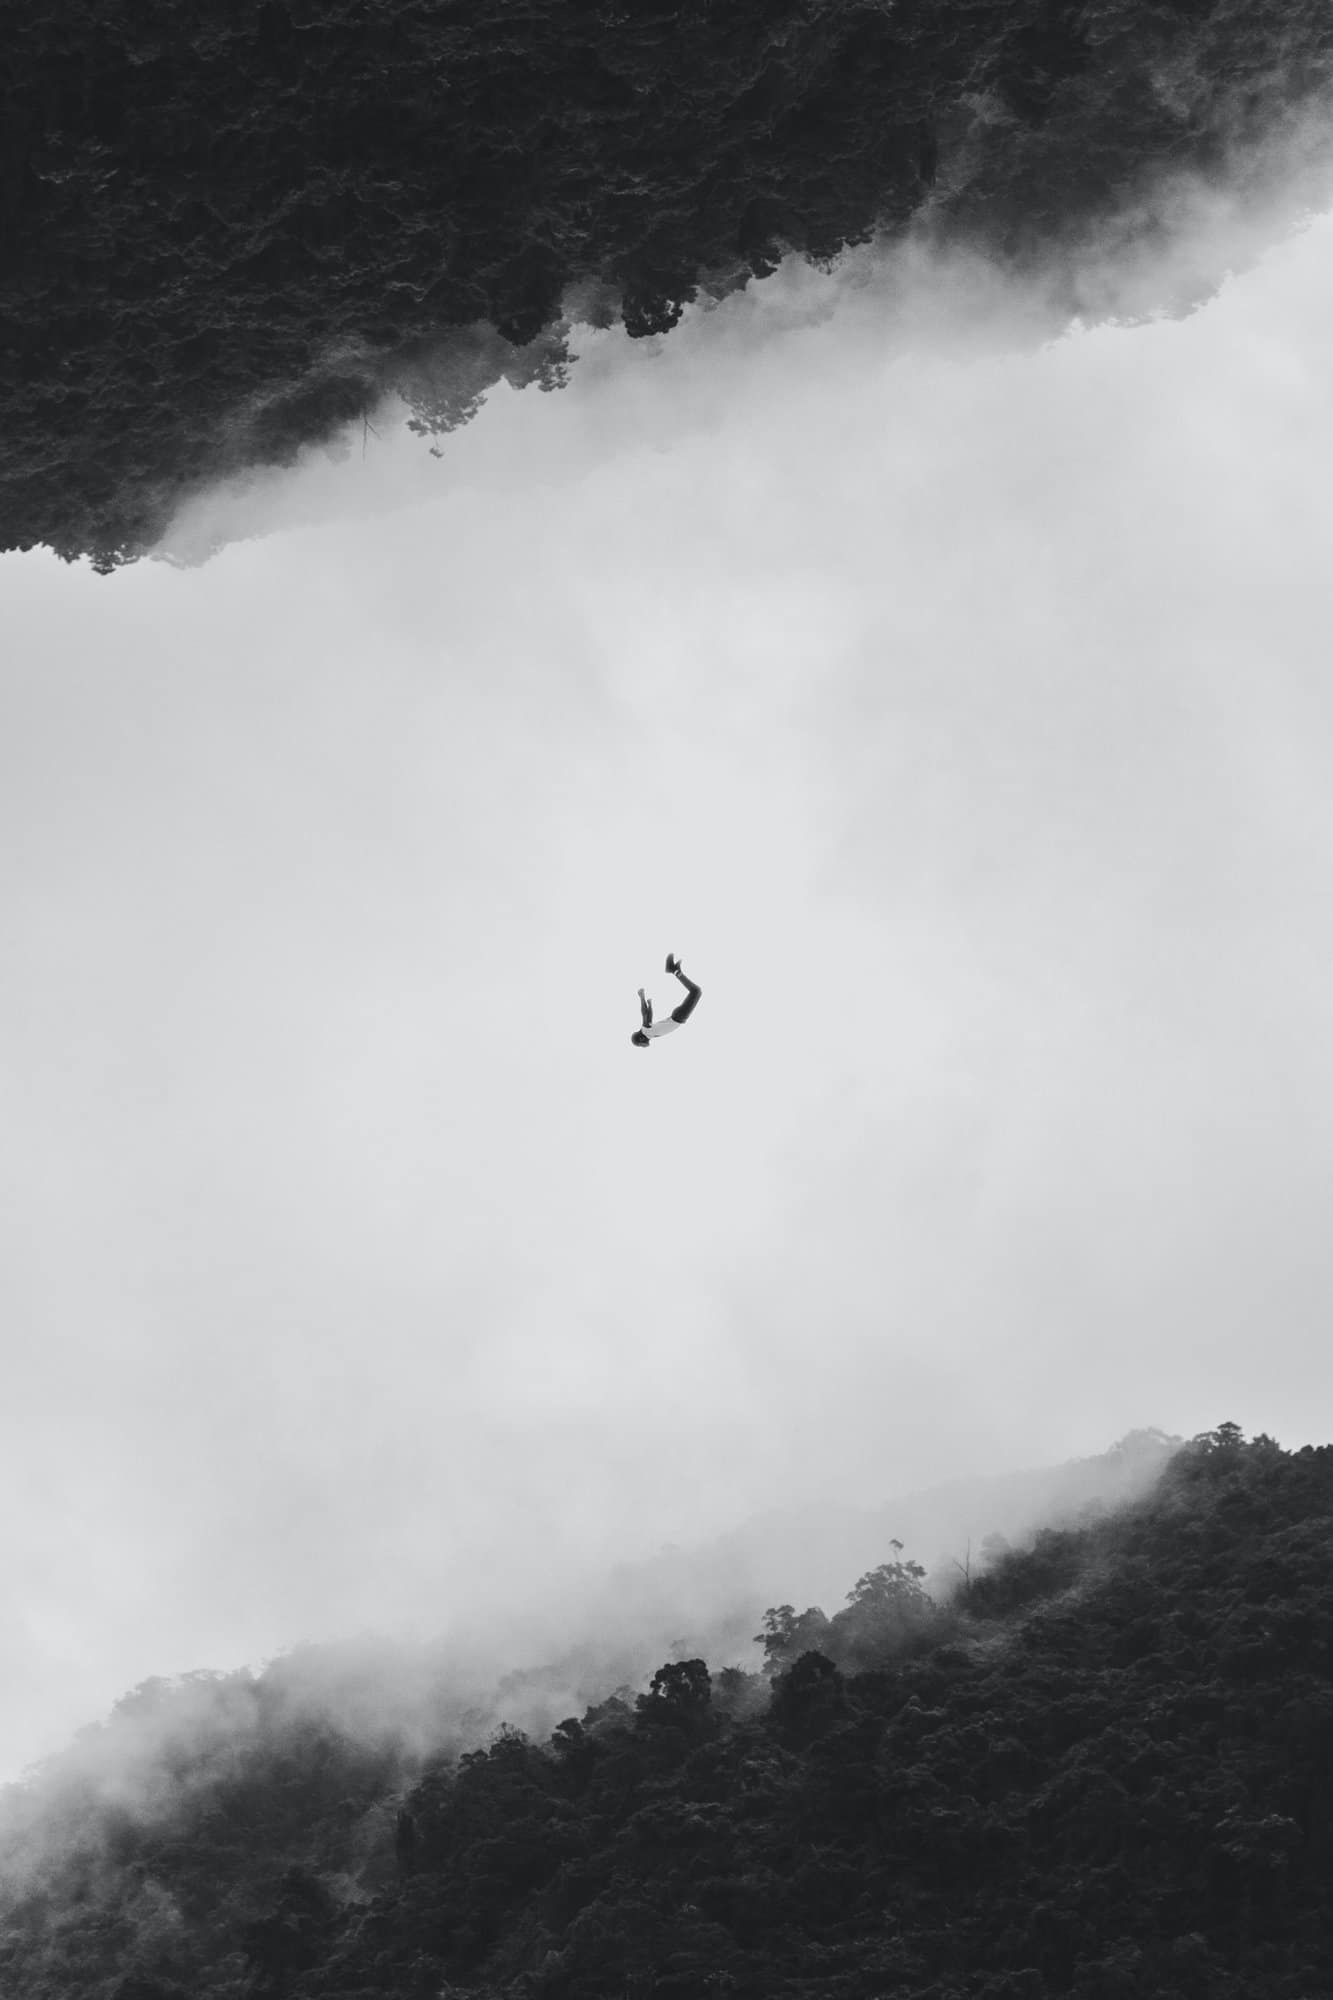 artistic image that shows a falling man in the middle and a dark cloud at the top and bottom